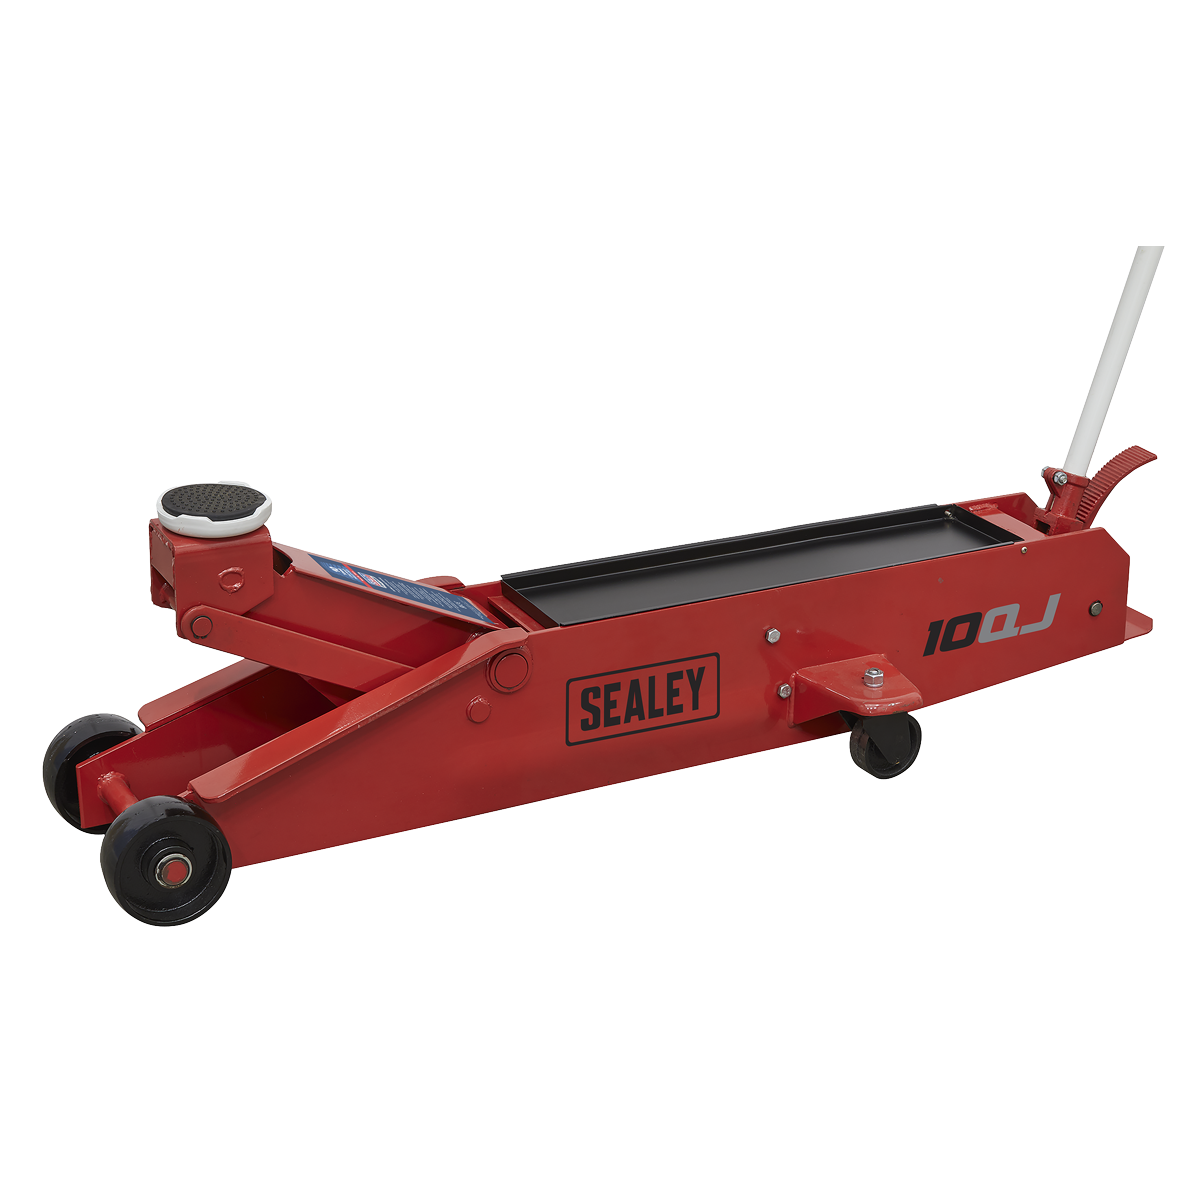 Sealey trolley jack with tool tray 10QJ